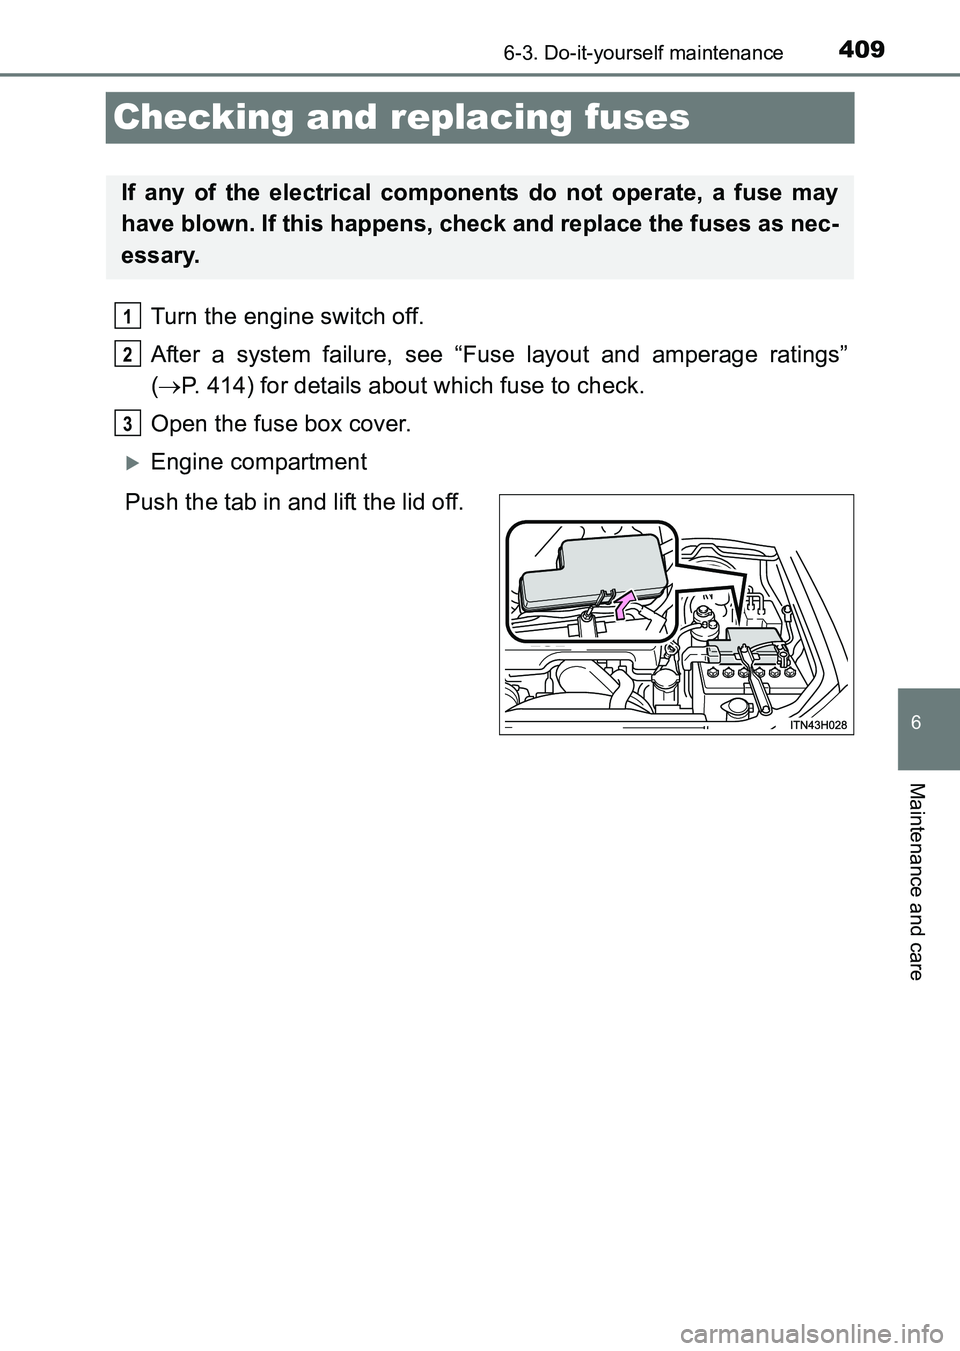 TOYOTA HILUX 2015  Owners Manual (in English) 409
6
6-3. Do-it-yourself maintenance
Maintenance and care
HILUX_OM_OM0K219E_(EE)
Checking and replacing fuses
Turn the engine switch off.
After a system failure, see “Fuse layout and amperage ratin